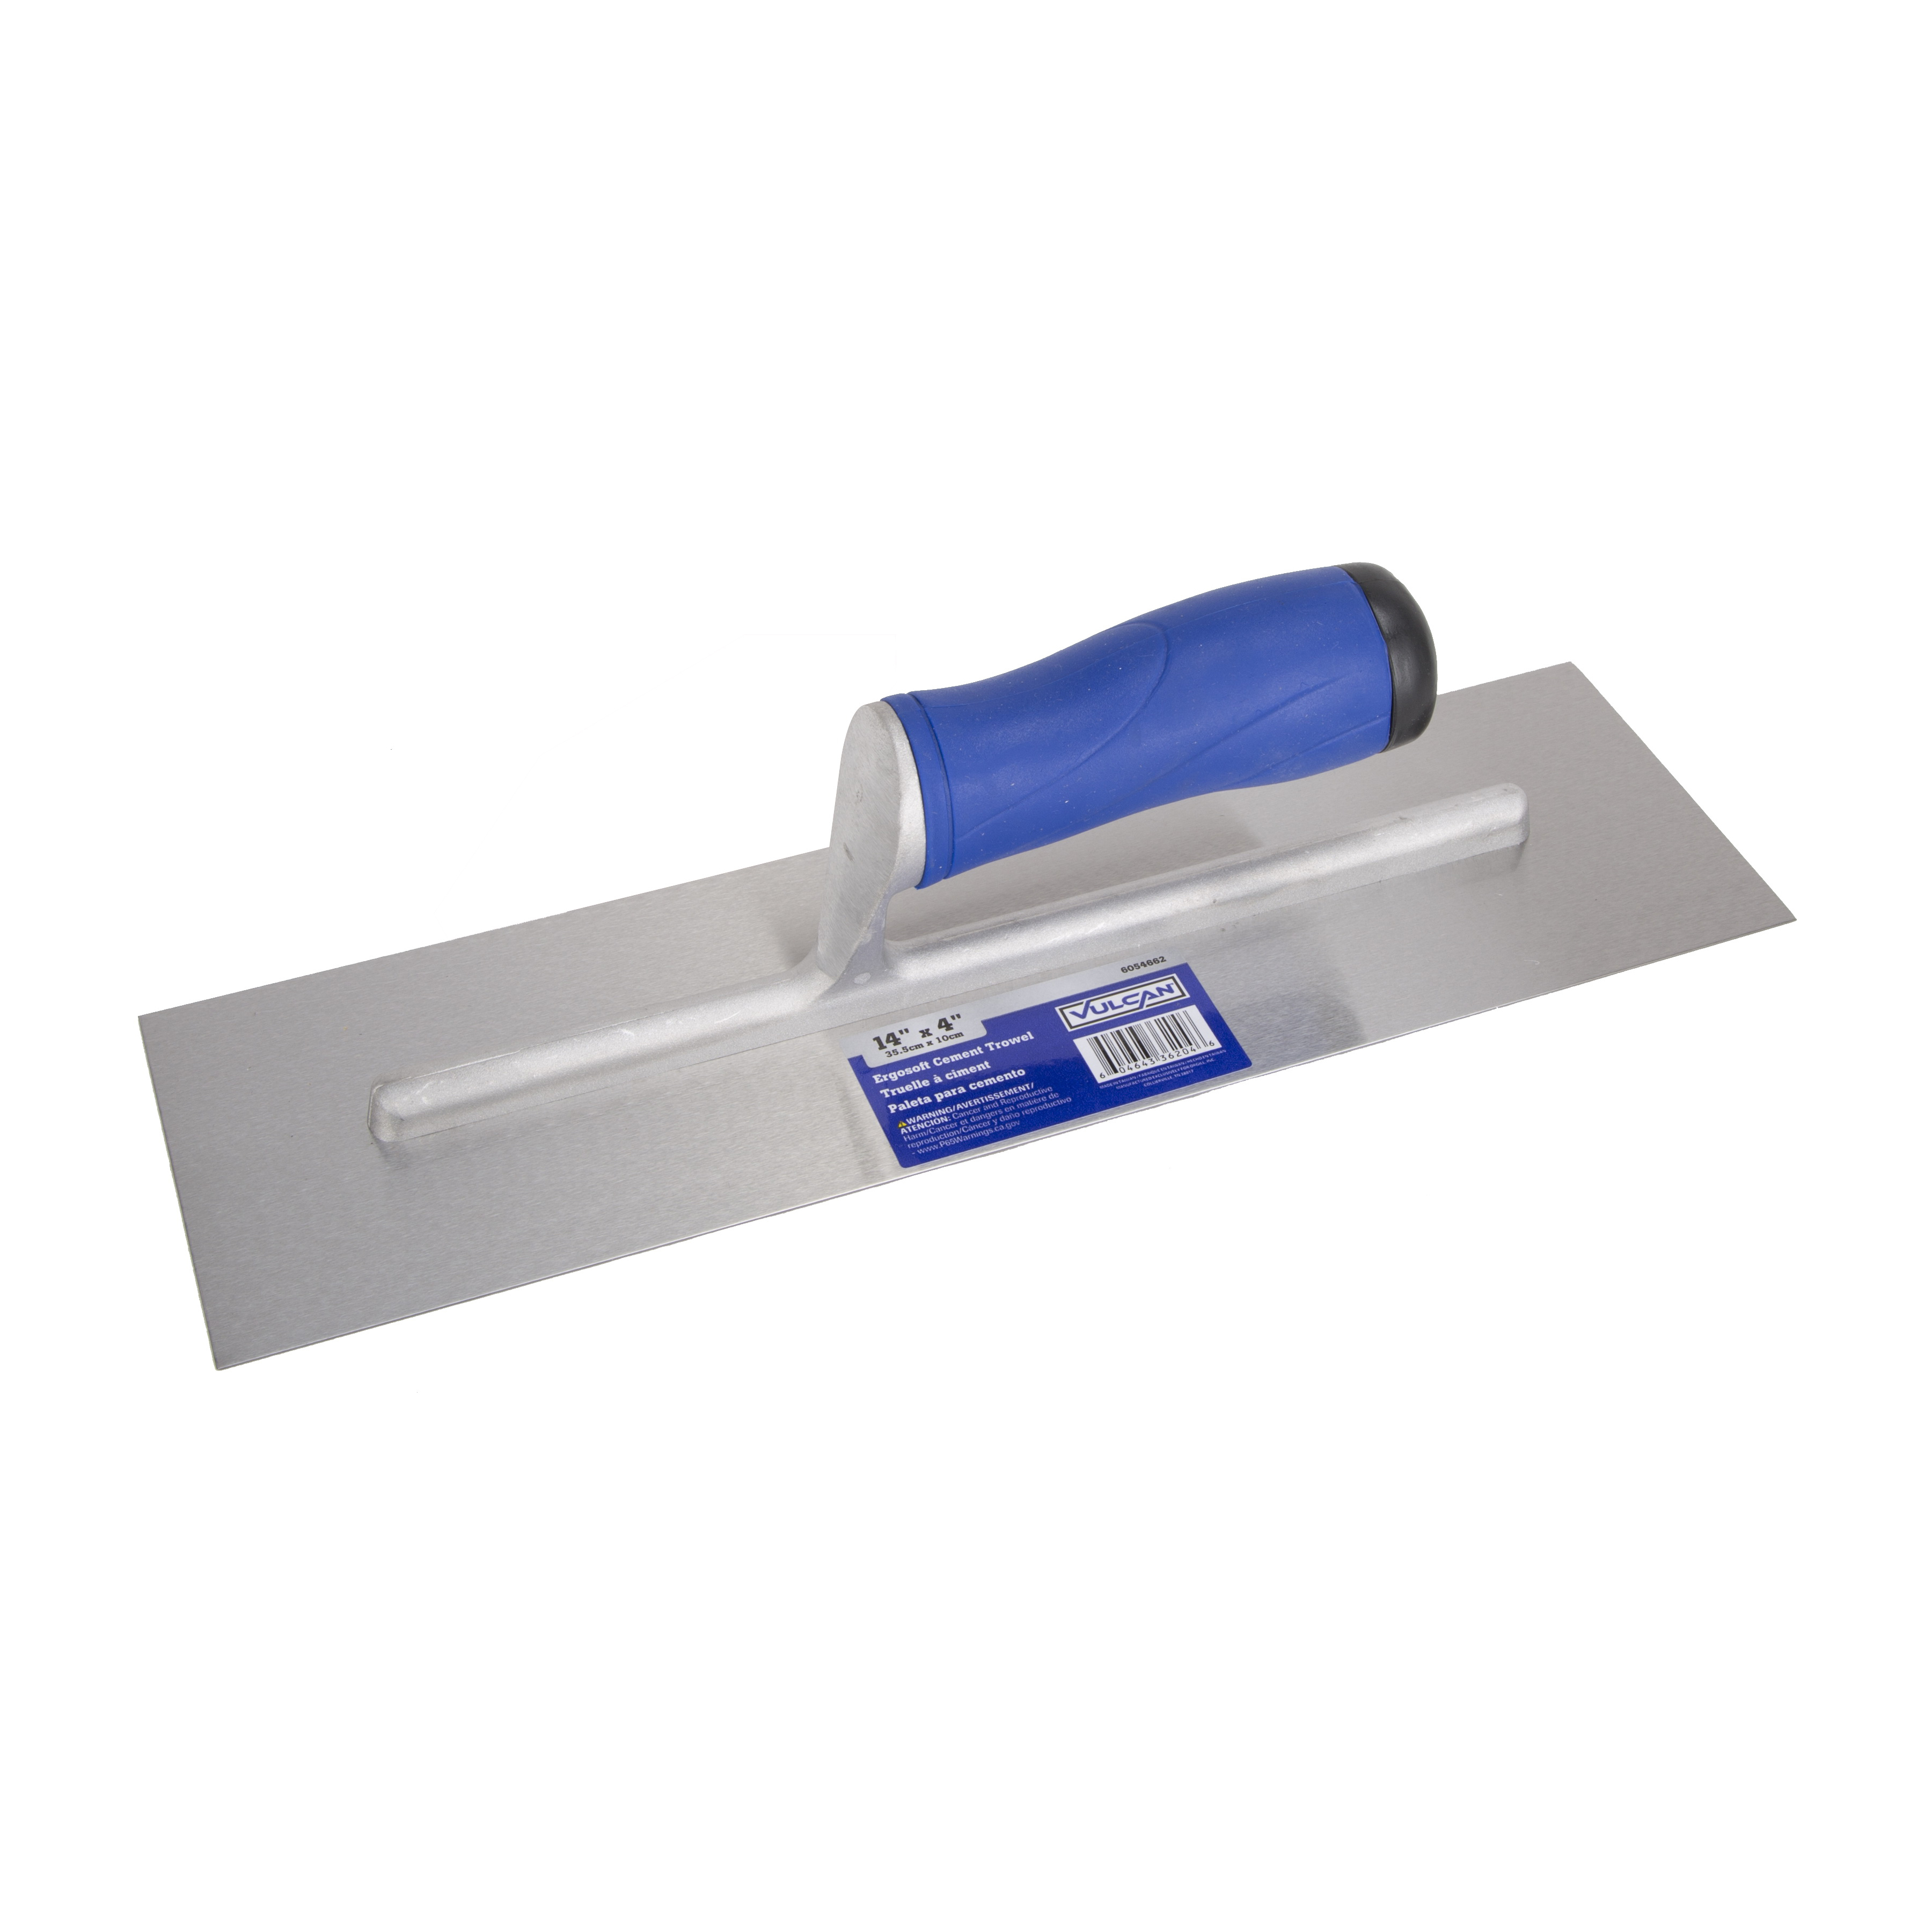 36204 Cement Trowel, 14 in L Blade, 4 in W Blade, Right Angle End, Ergonomic Handle, Plastic Handle